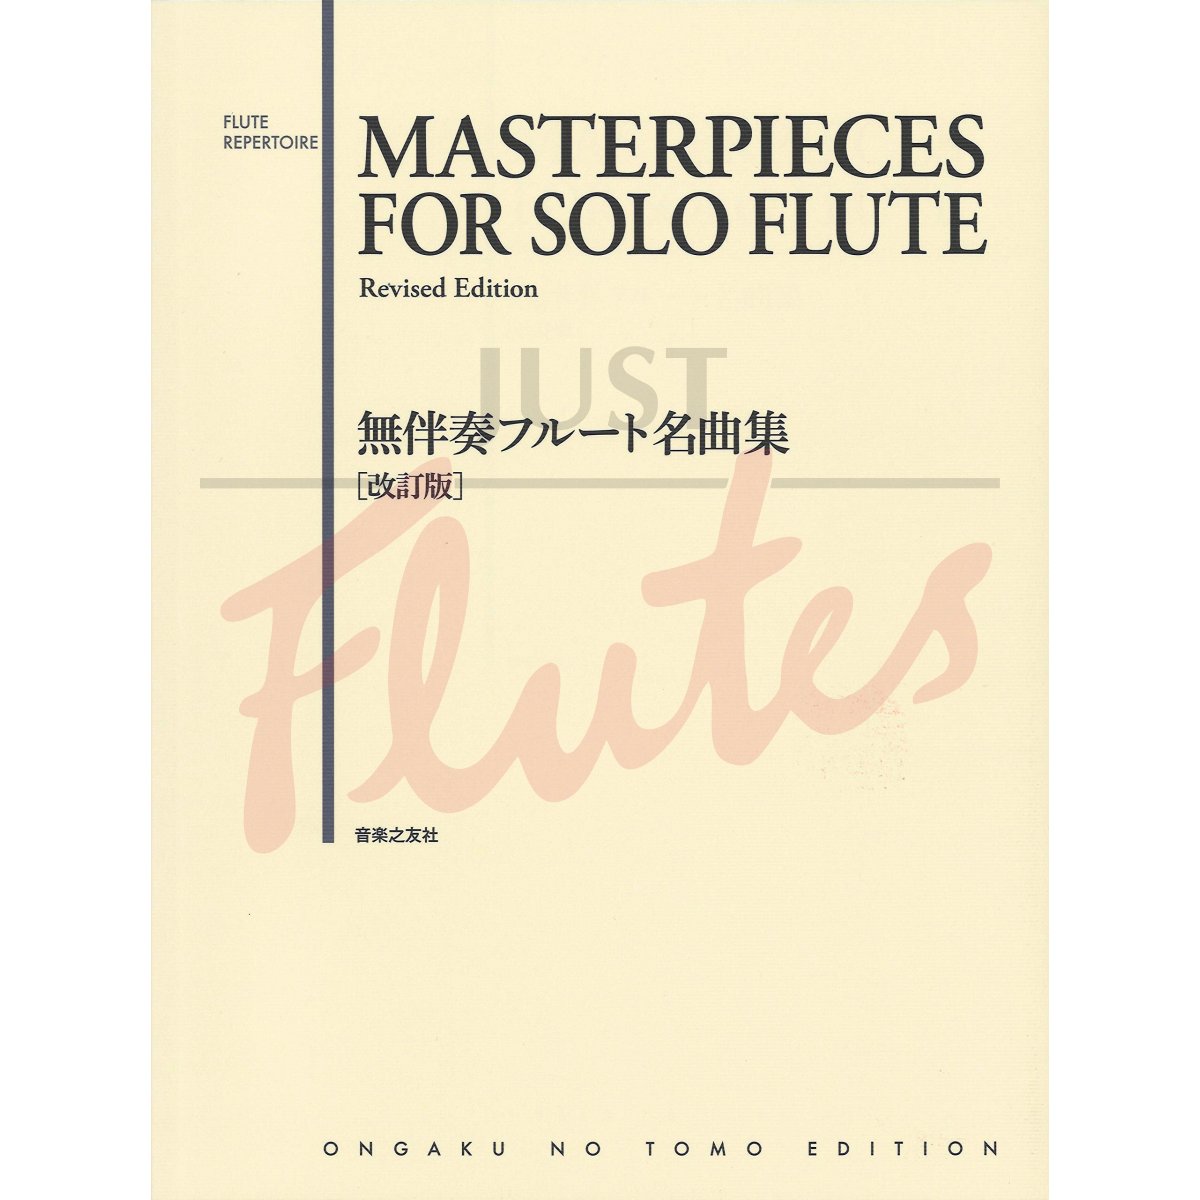 Masterpieces for Solo Flute